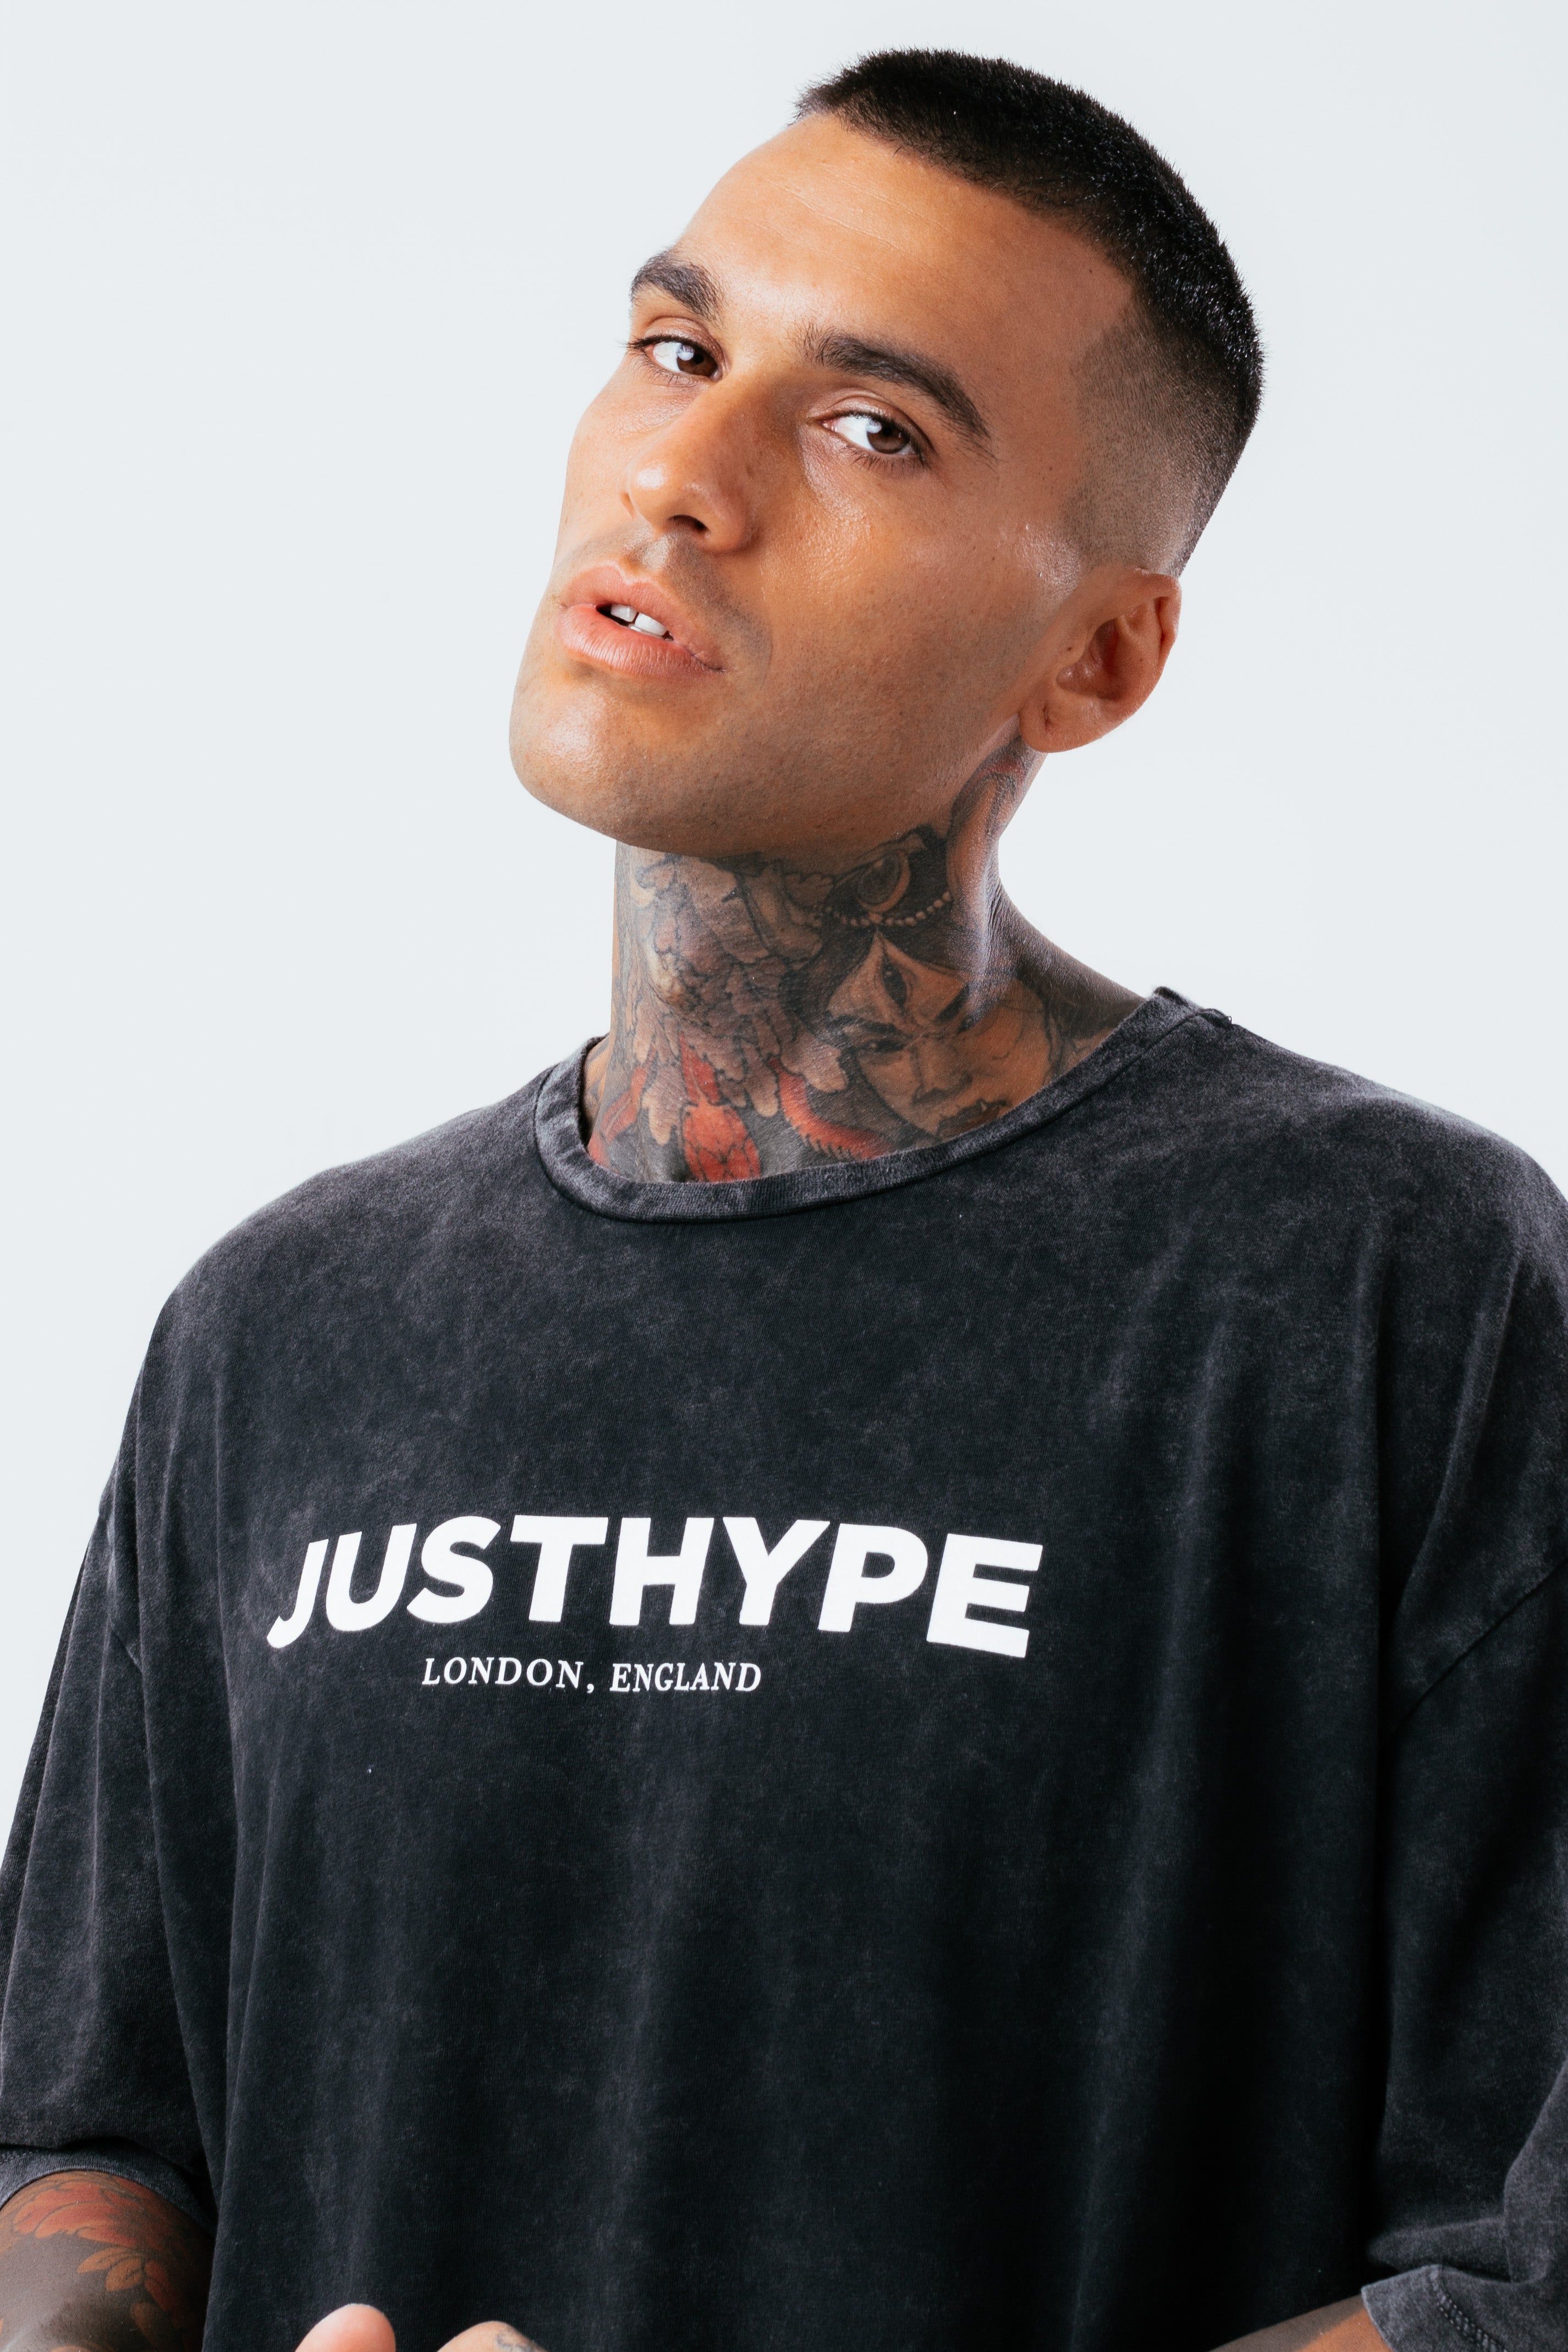 The HYPE. Men's Oversized T-shirt boasts a soft touch fabric base for supreme comfort. Designed in our oversized men's tee shape, with a crew neckline and enlarged sleeves for a trending fit. The model wears a size M. Machine washable.